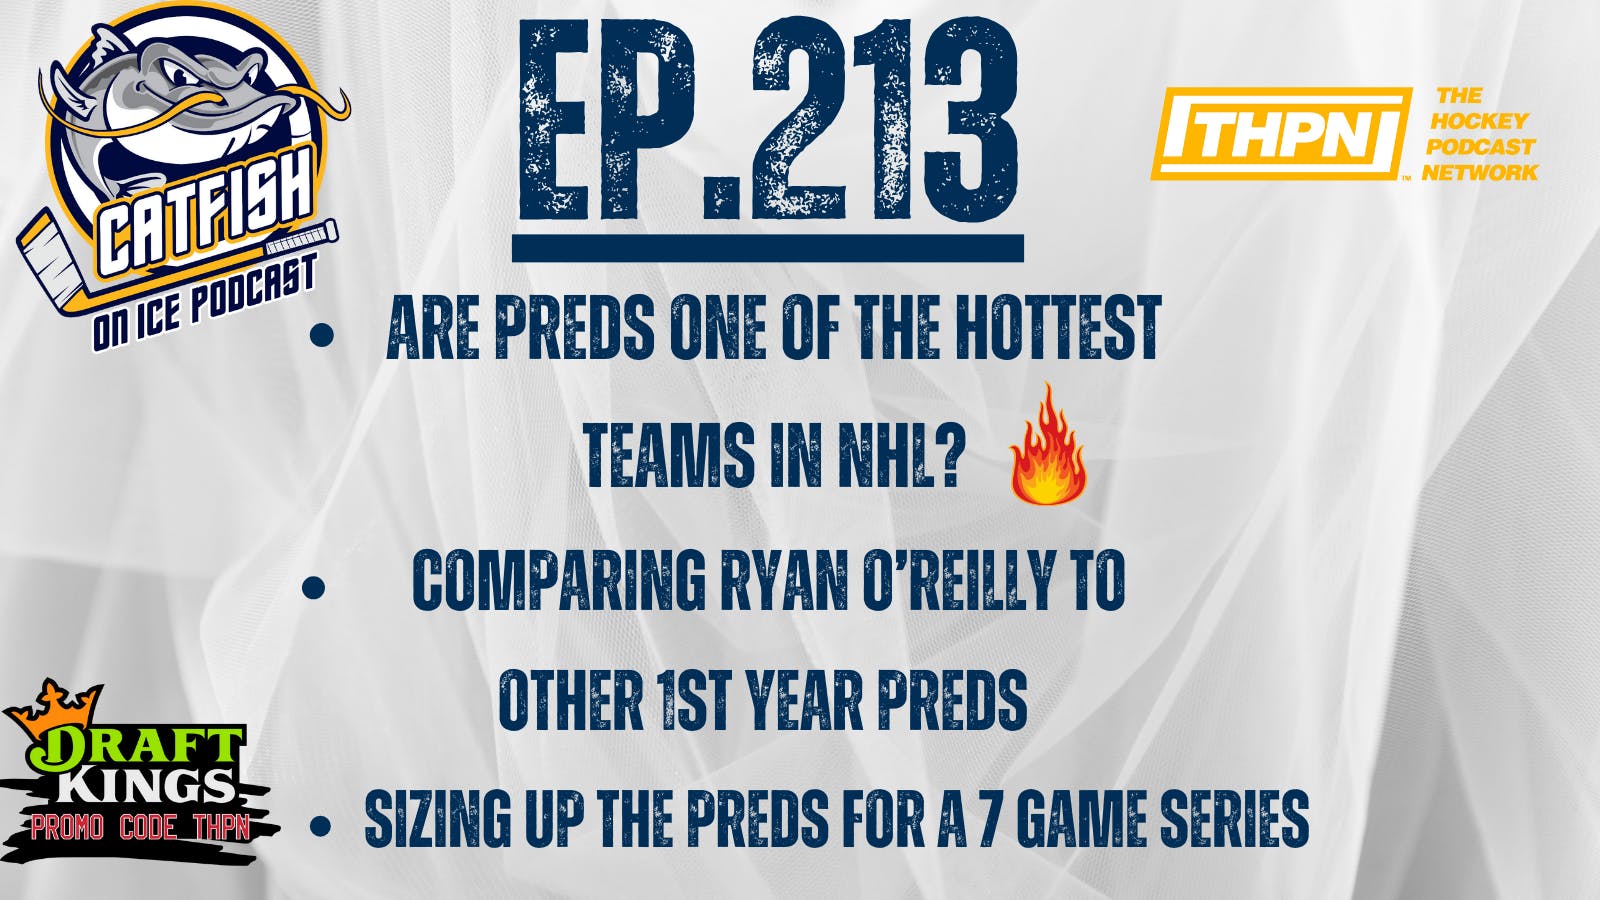 EP-213: Preds the Hottest Team in NHL? How would they Stack Up in a 7-Game Playoff Series?